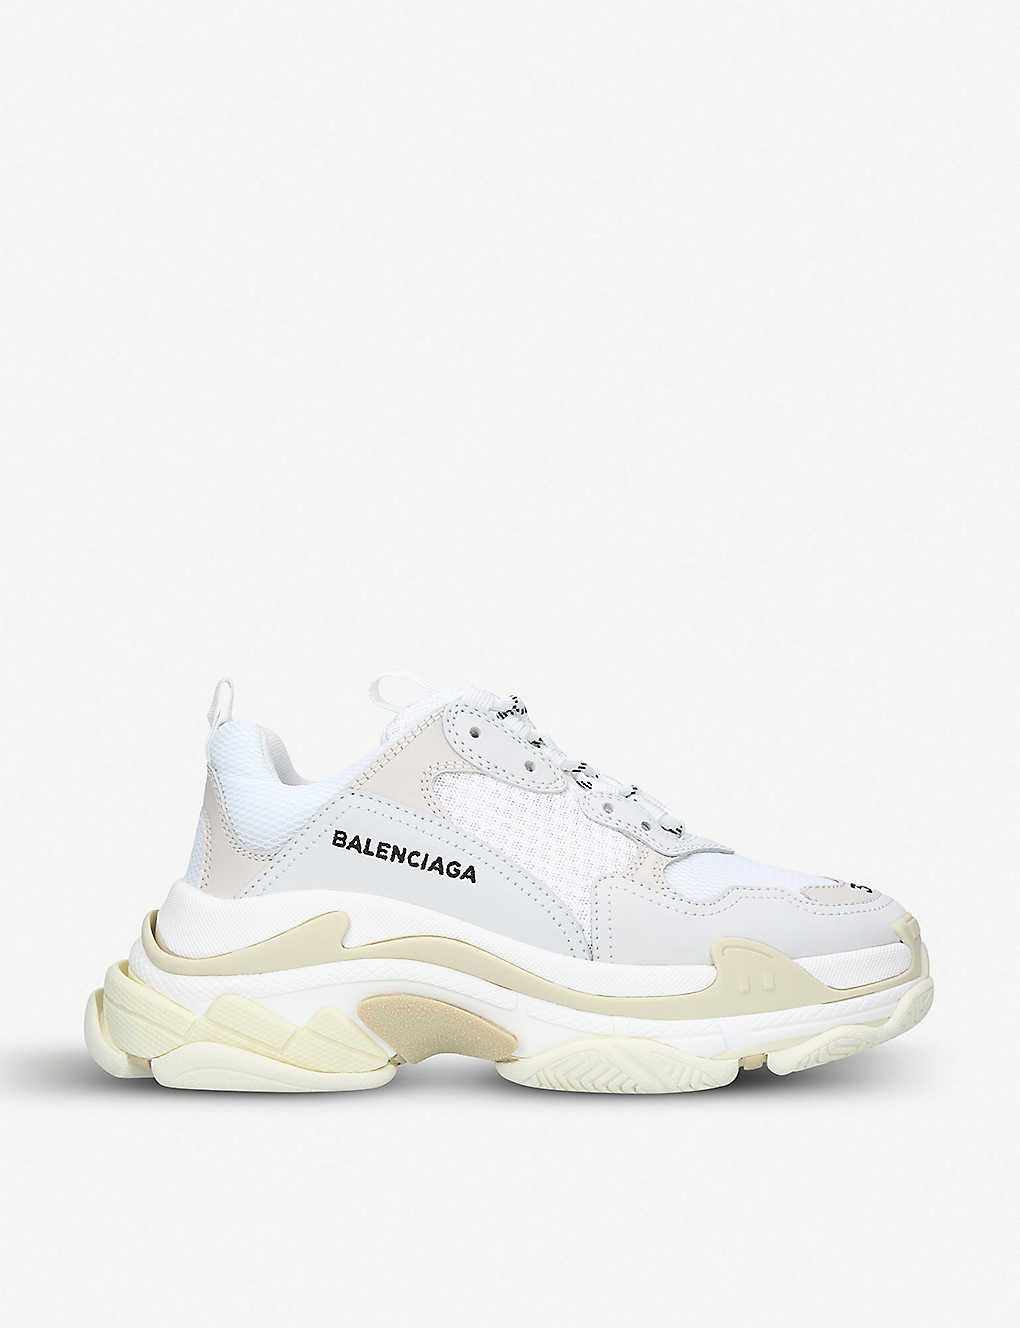 Remarkable Deal on Balenciaga Green Triple S Clear Sole